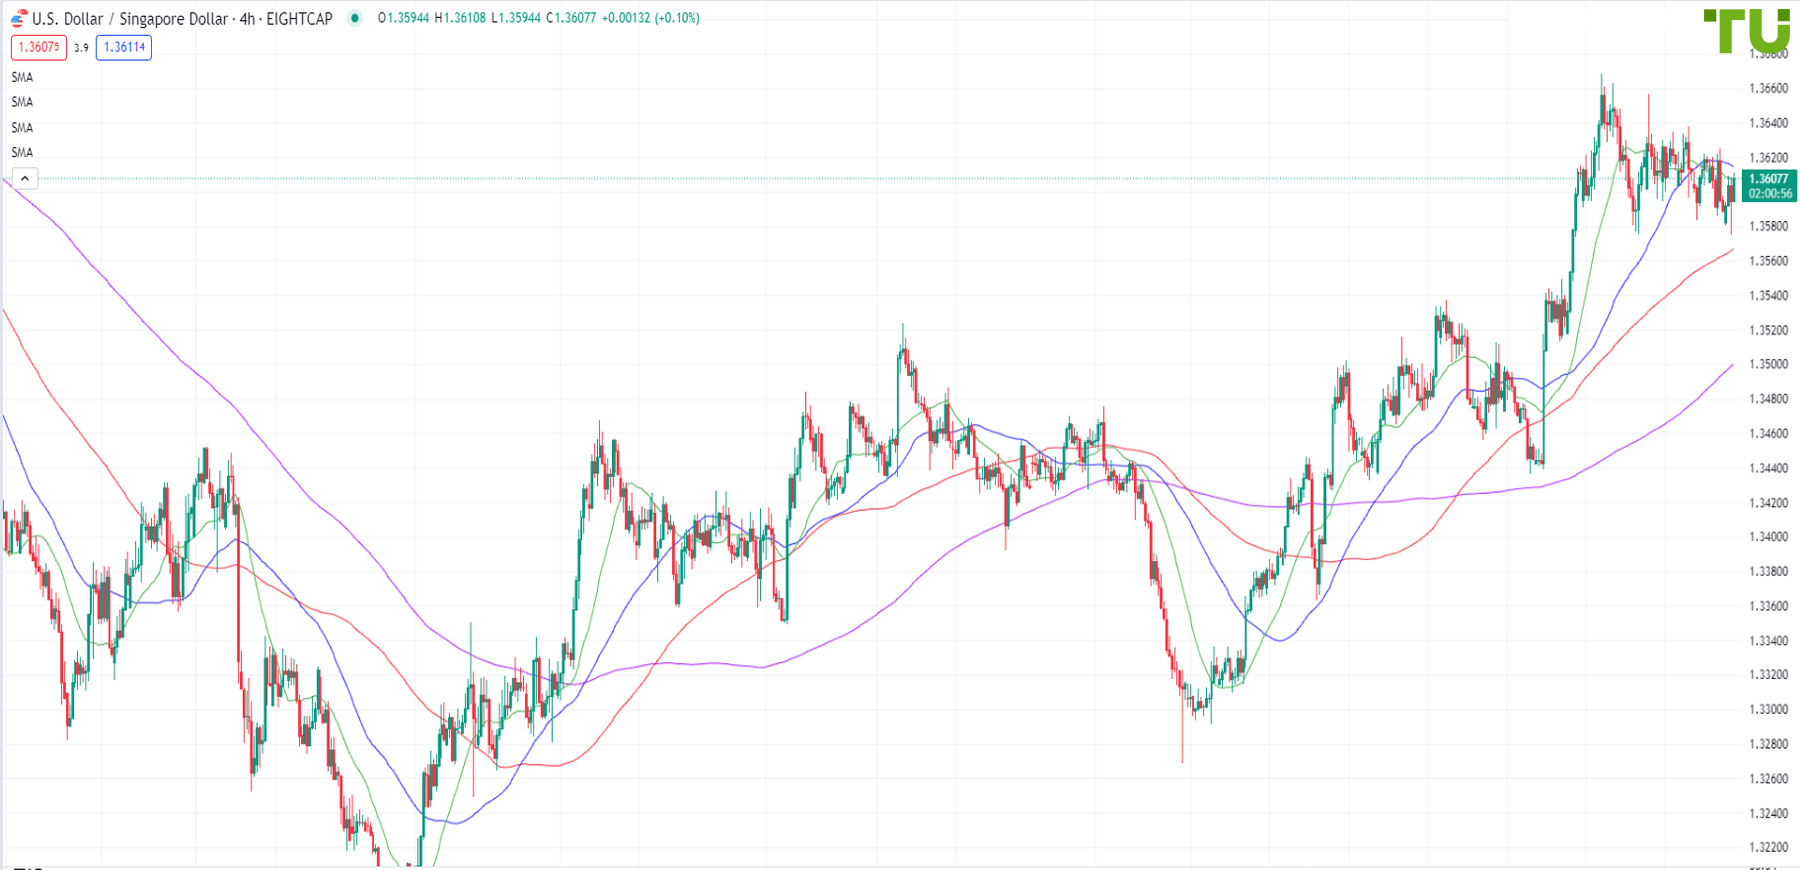 USD/SGD is being bought from support ahead of the U.S. PCE